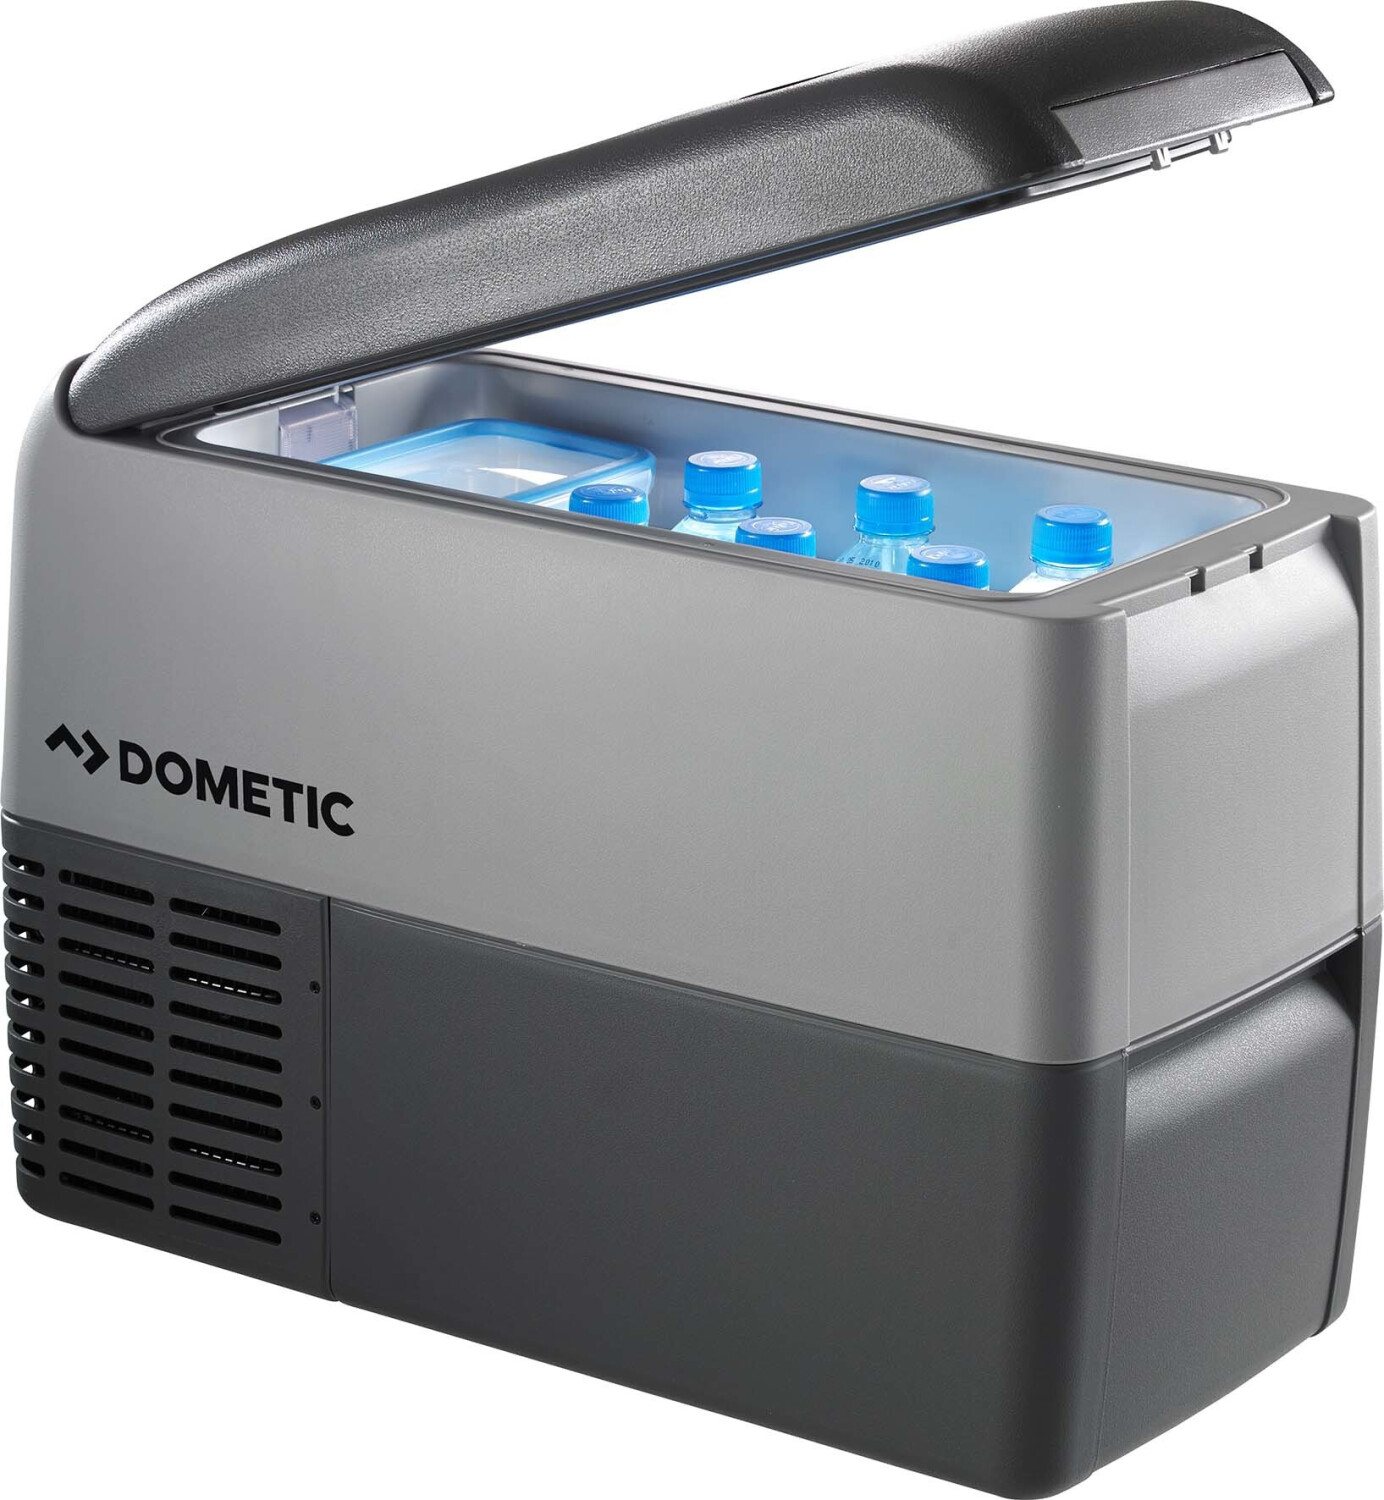 Buy Dometic CoolFreeze CDF 26 from £285.41 (Today) – Best Deals on